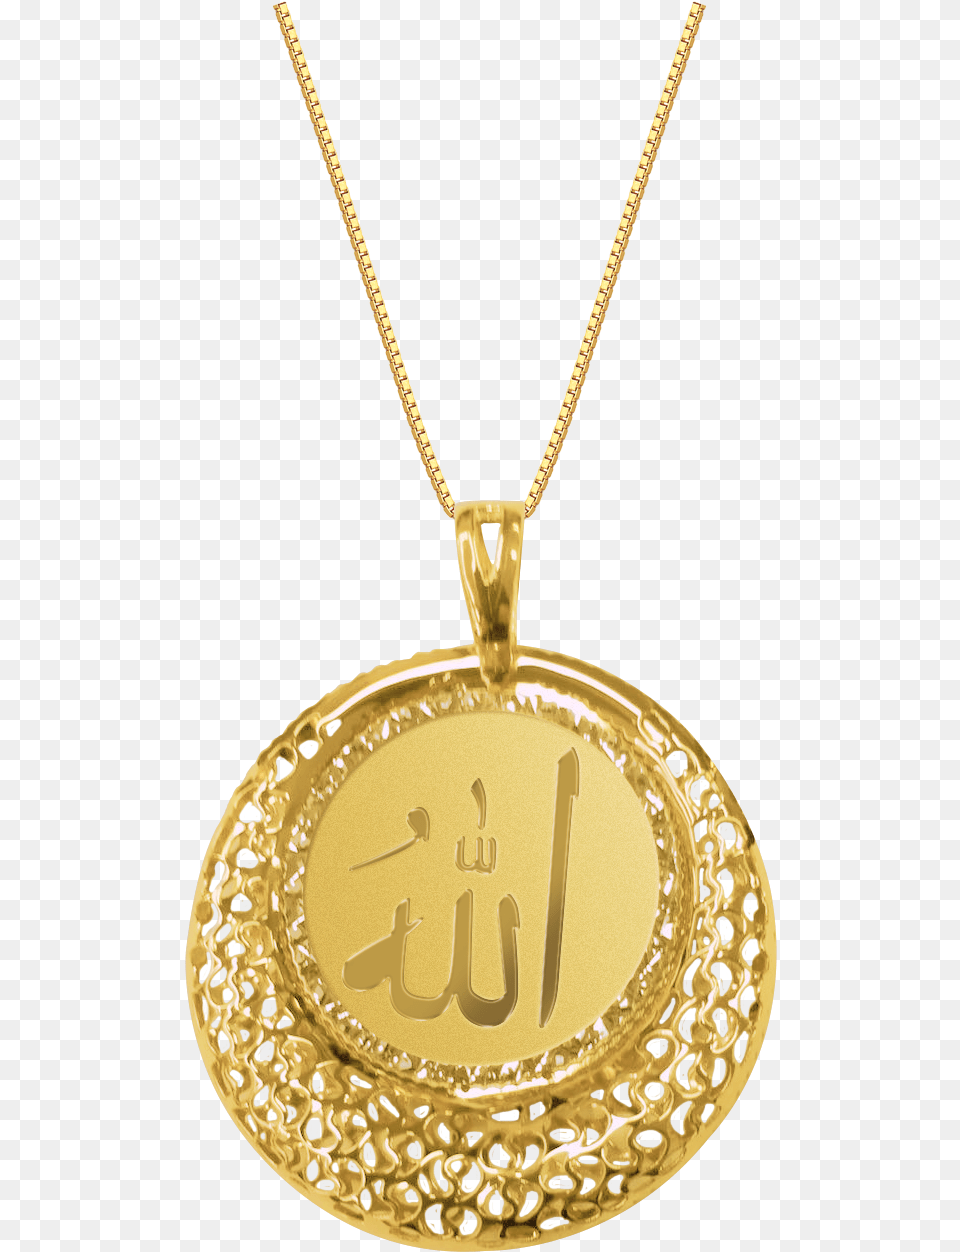 Handcrafted Gold Pendant Pendant, Accessories, Jewelry, Necklace Png Image